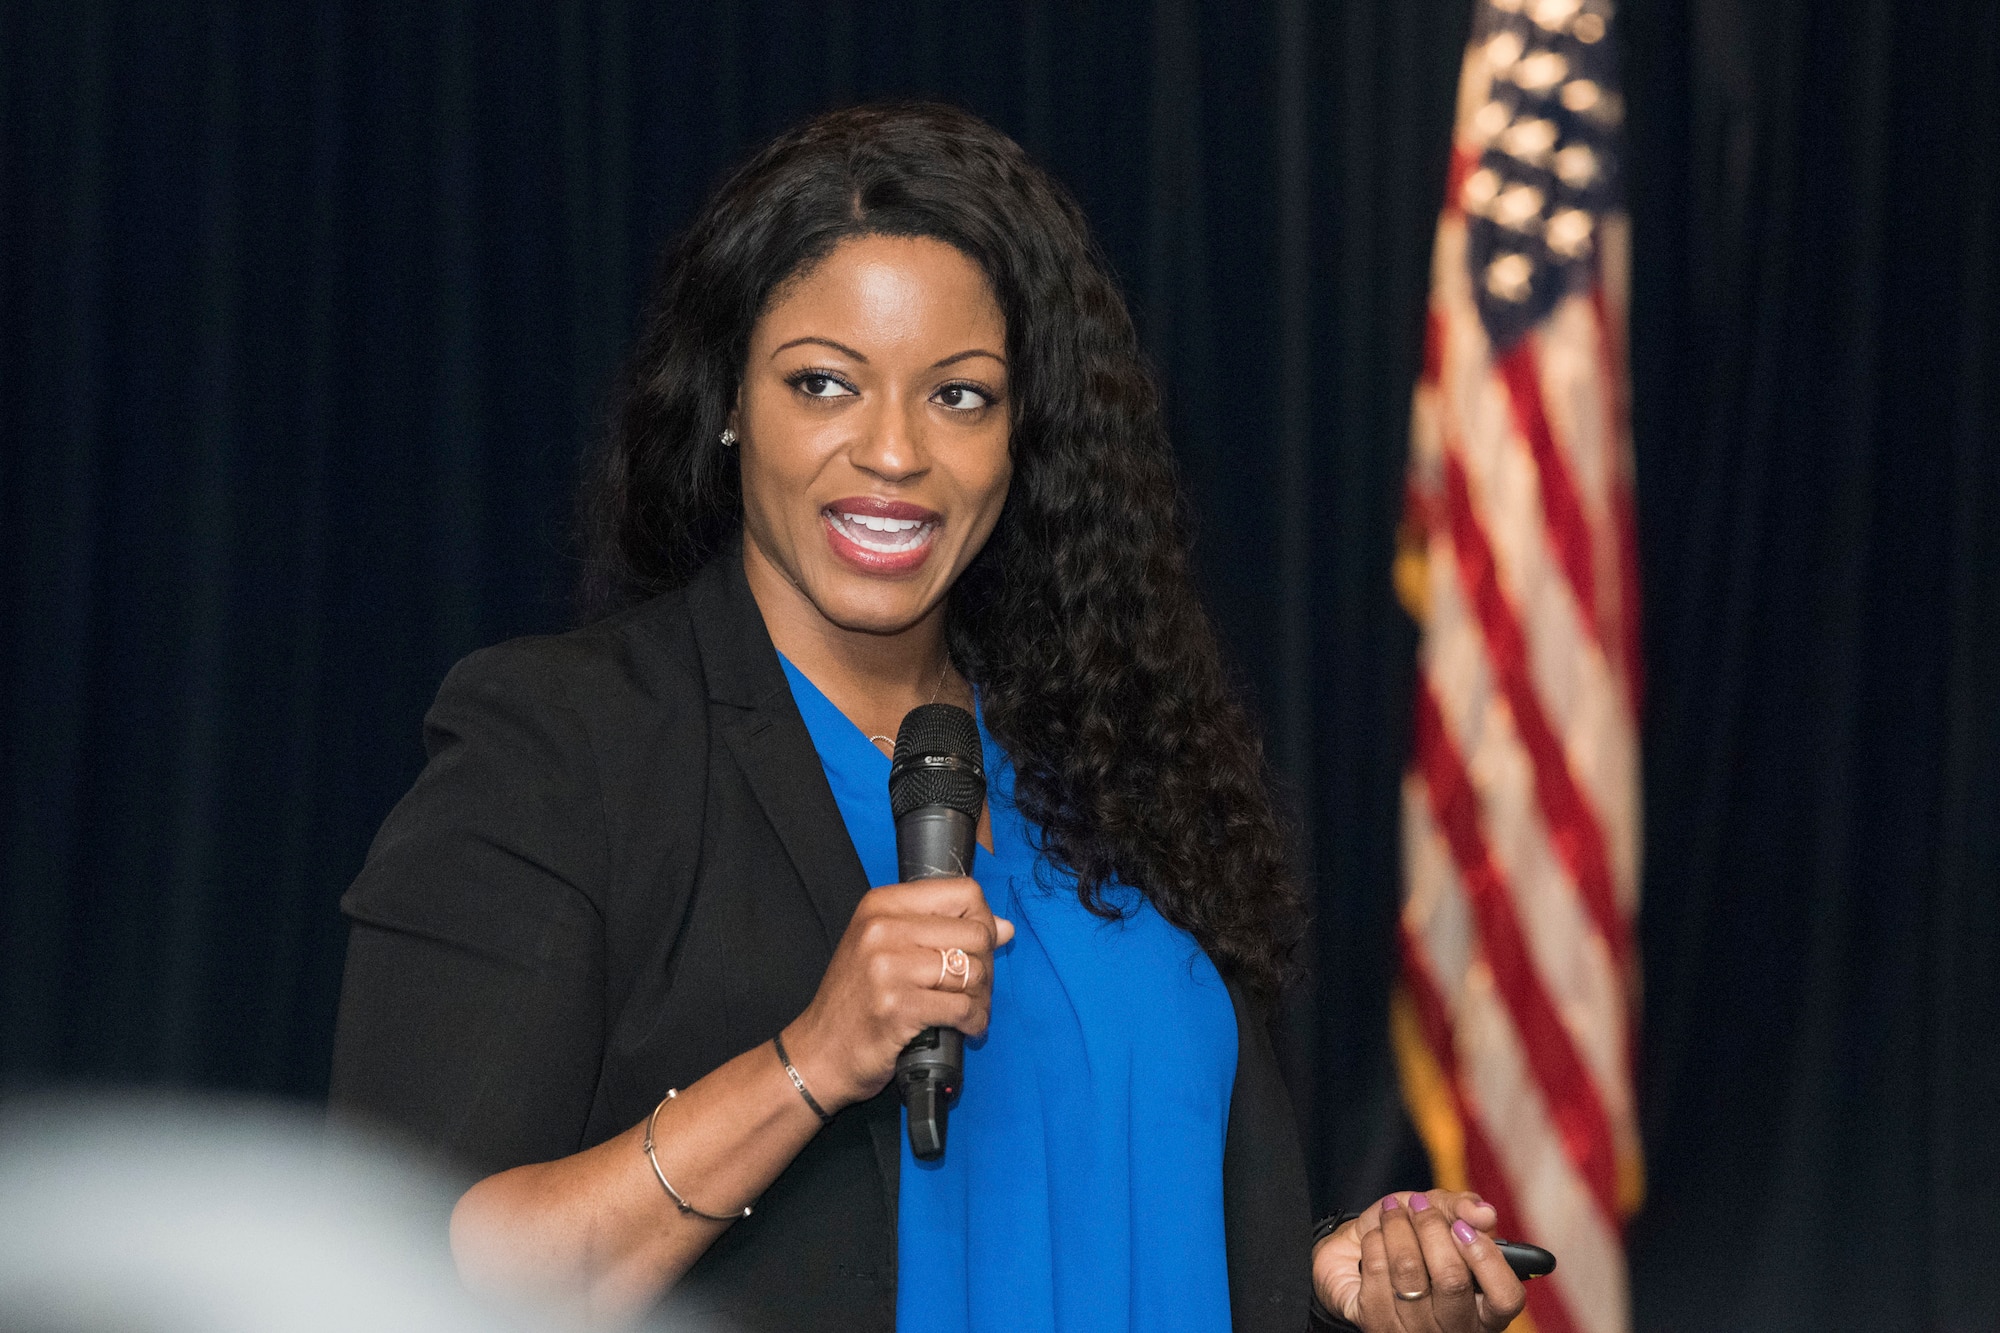 Andrea Wynne, 374th Force Support Squadron community readiness specialist, speaks during a Women’s History Month luncheon at Yokota Air Base, Japan, March 26, 2019.